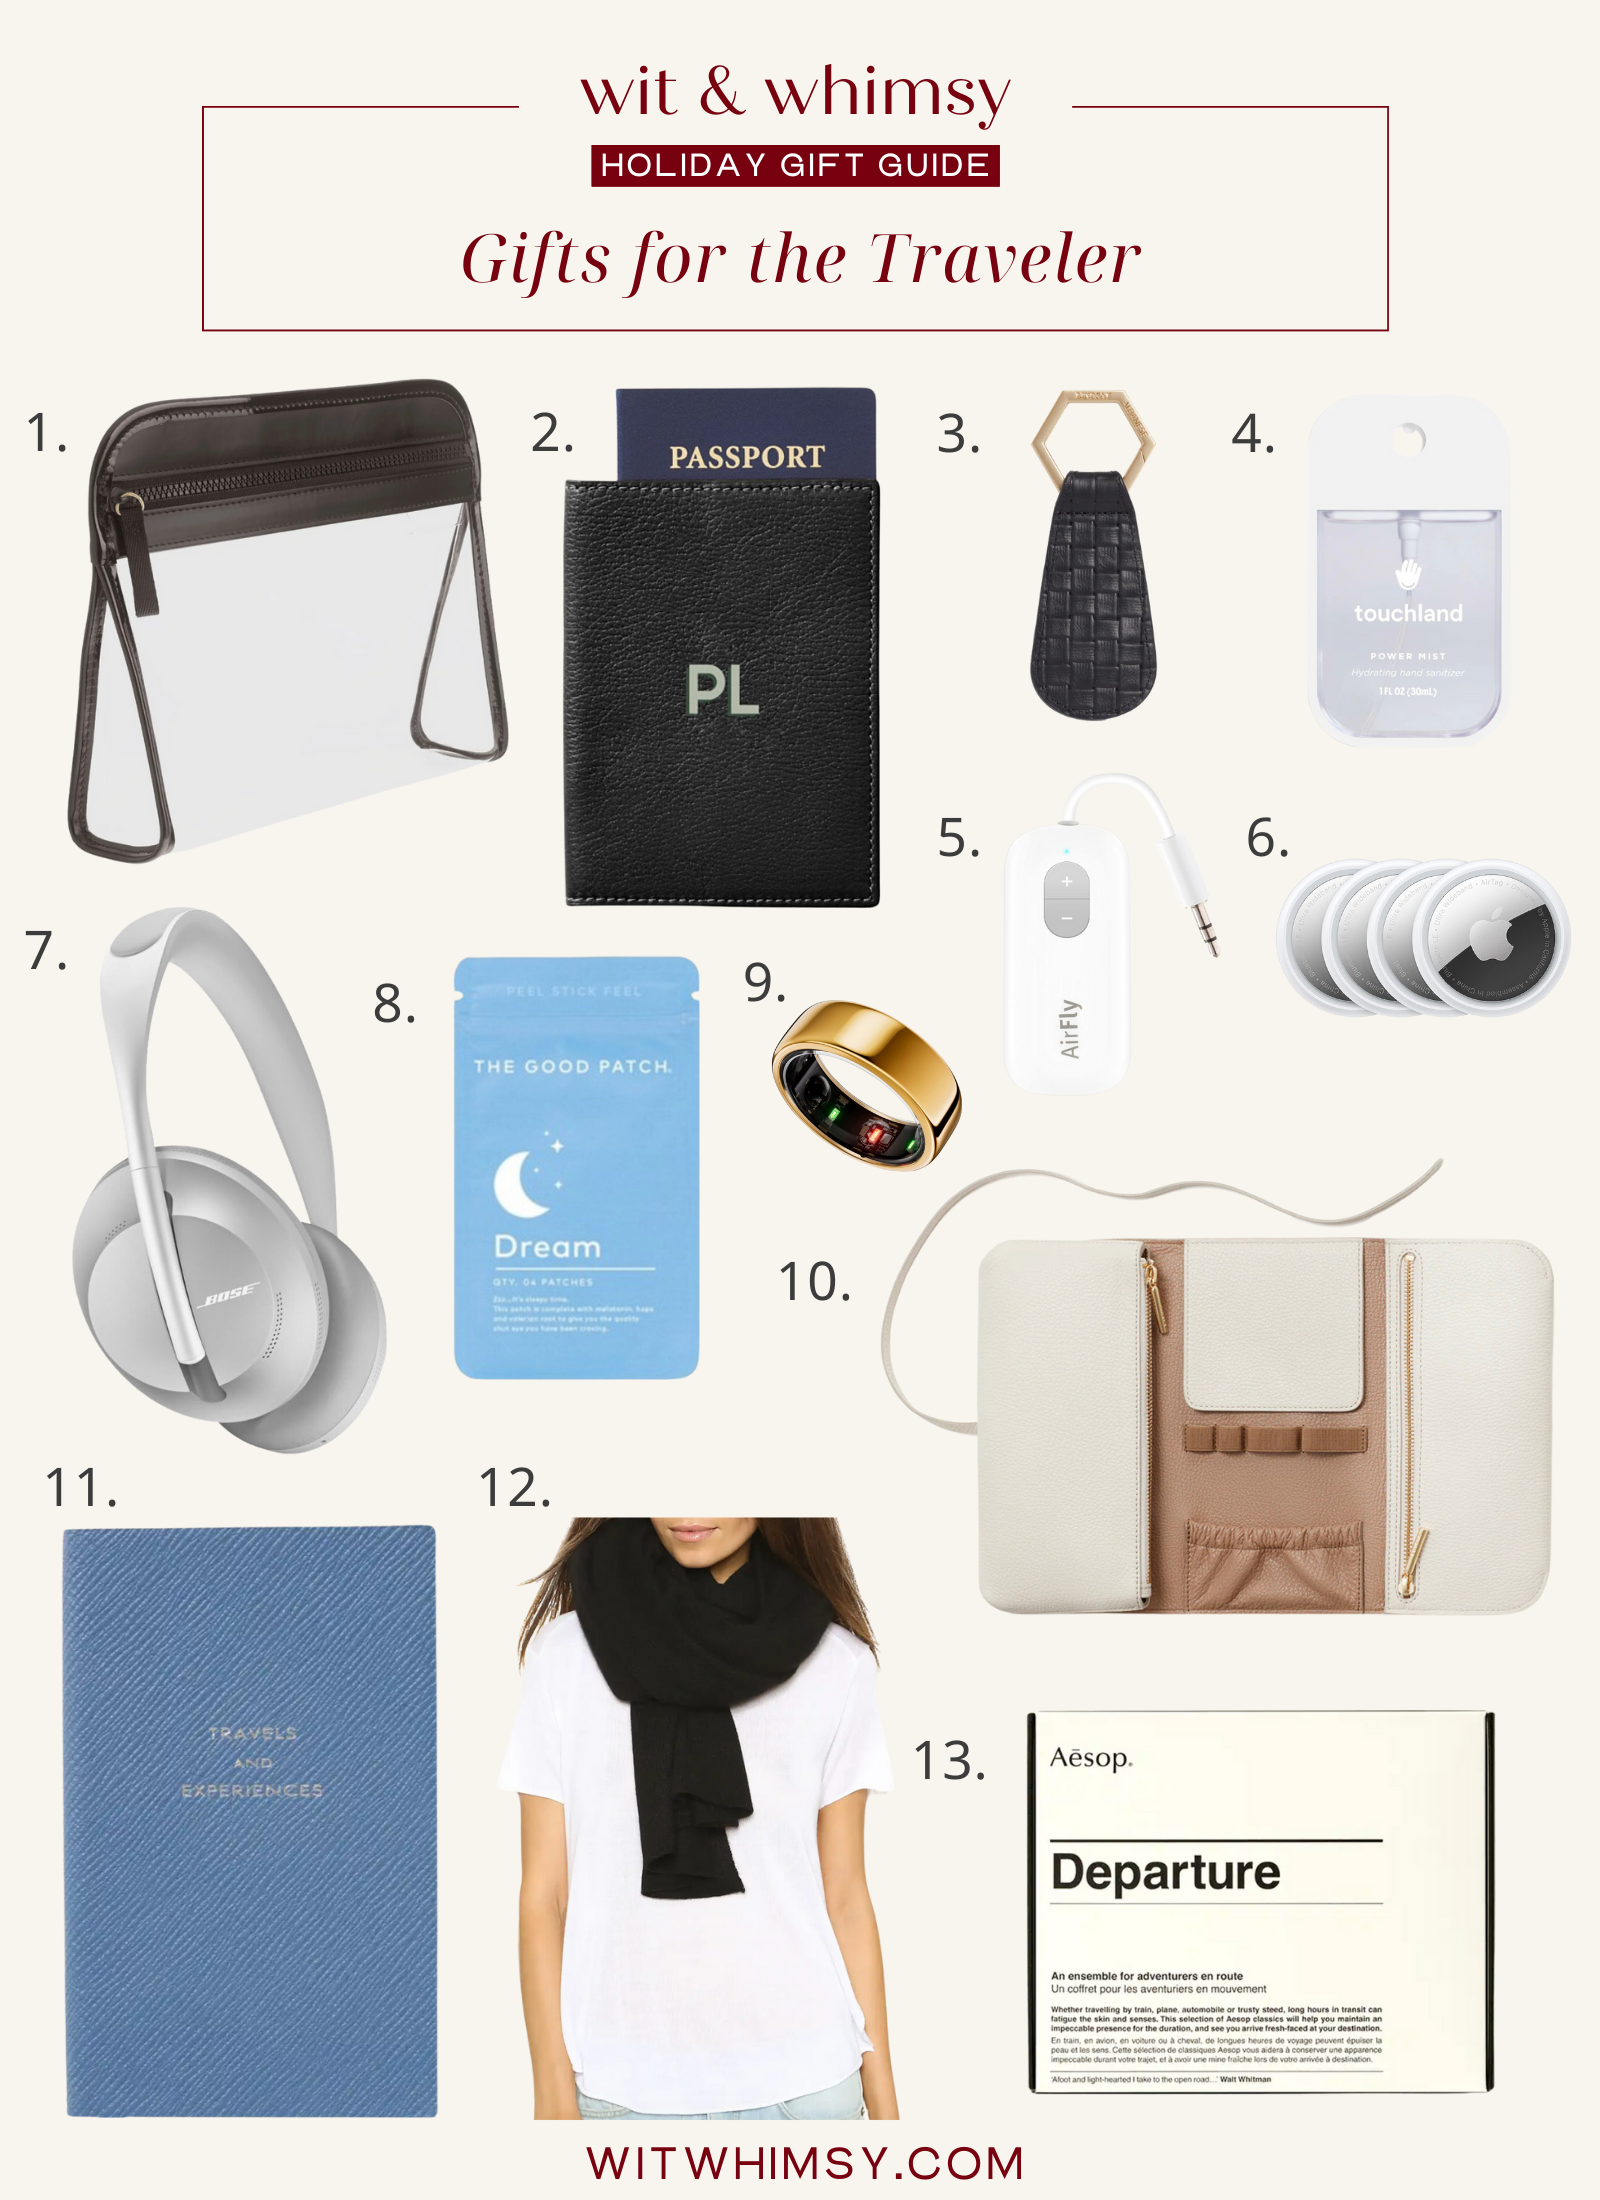 Collage of gifts for travelers